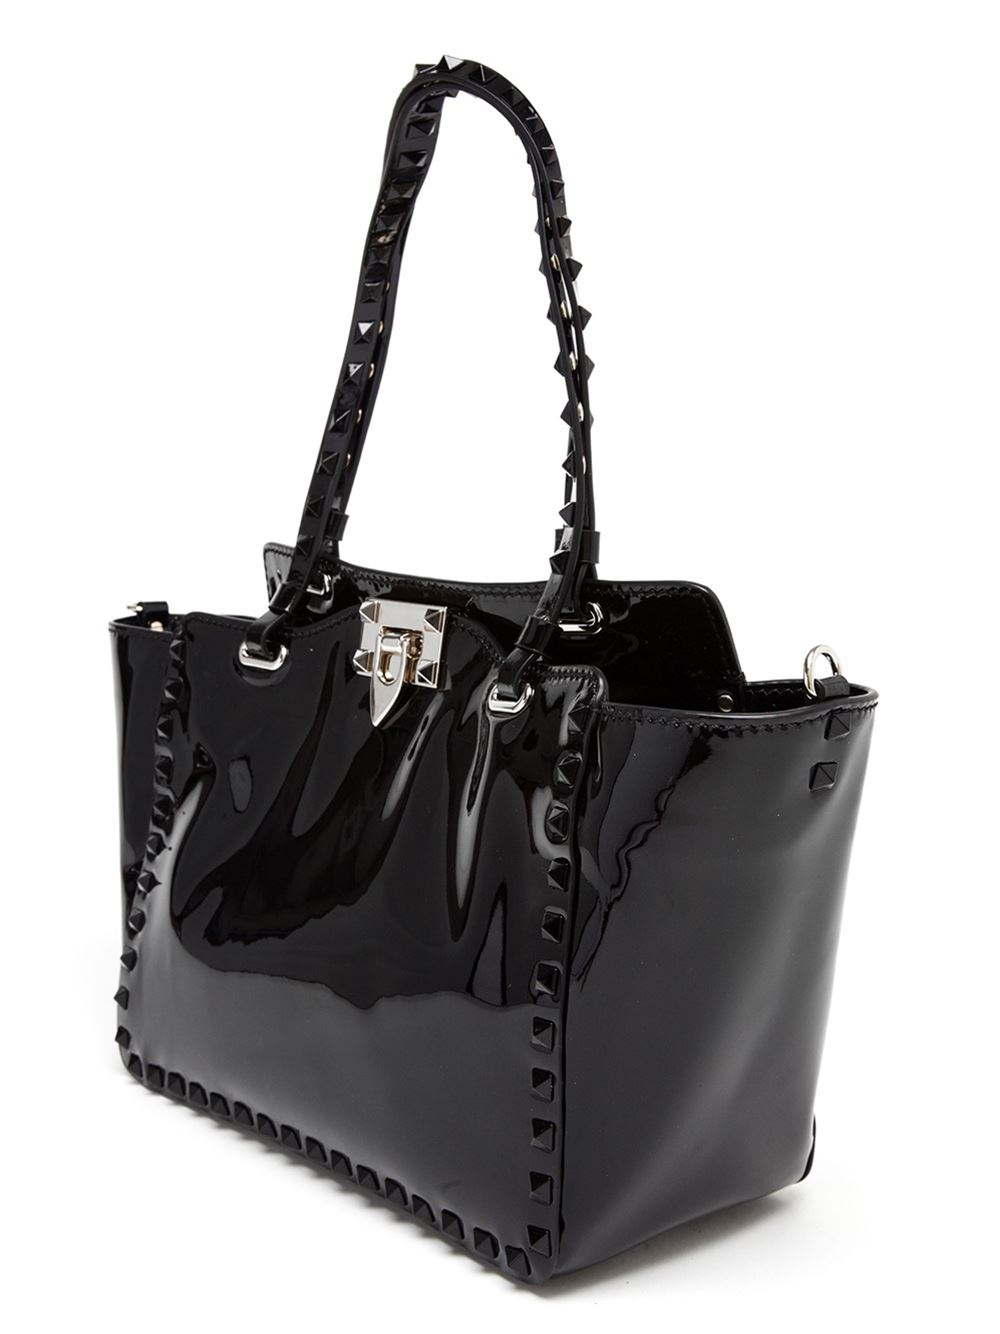 Valentino Rockstud Patent Leather Tote Bag in Black | Lyst